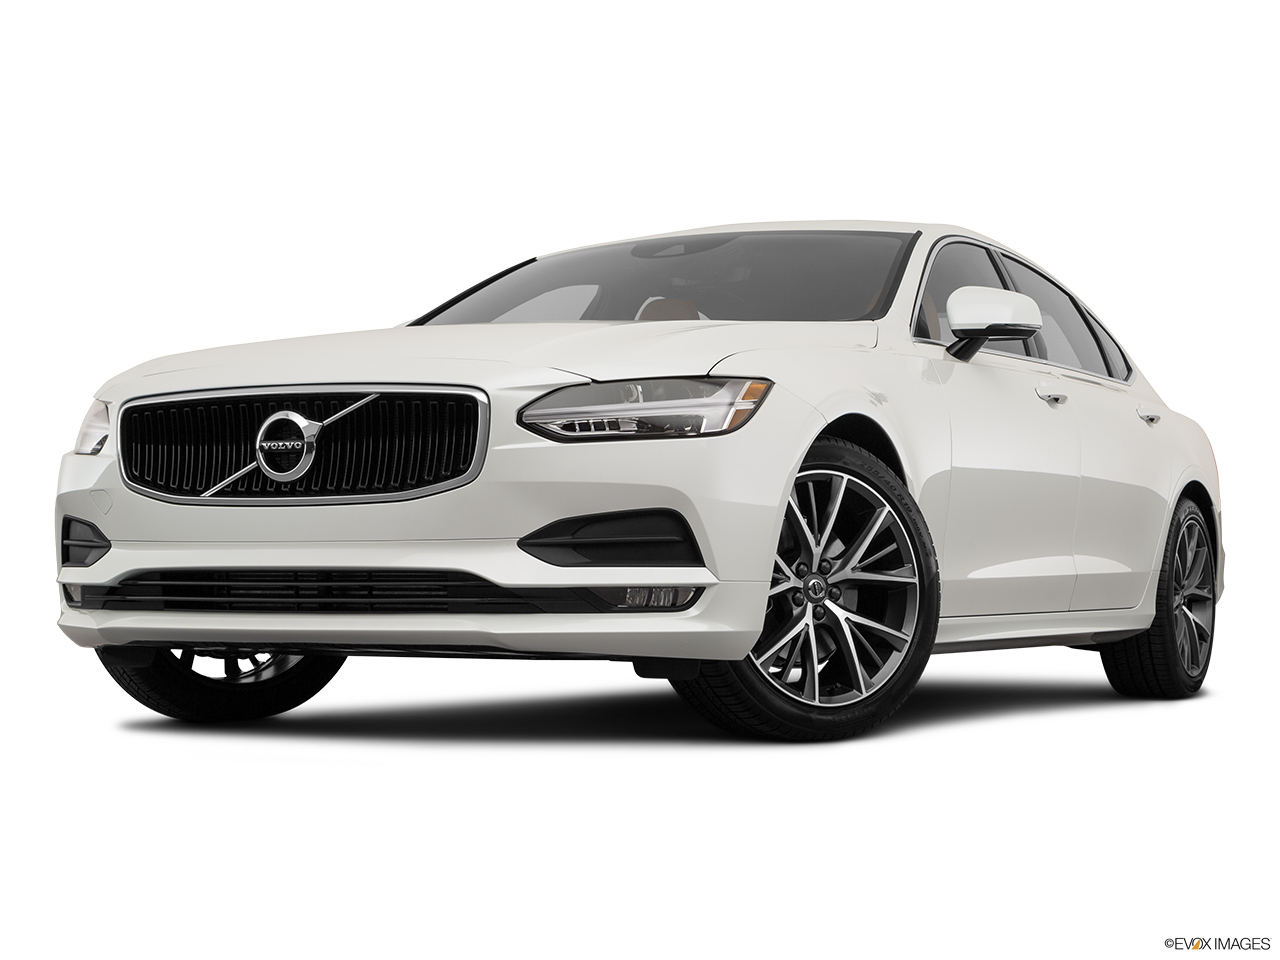 2019 Volvo S90 T5 Momentum Front angle view, low wide perspective. 